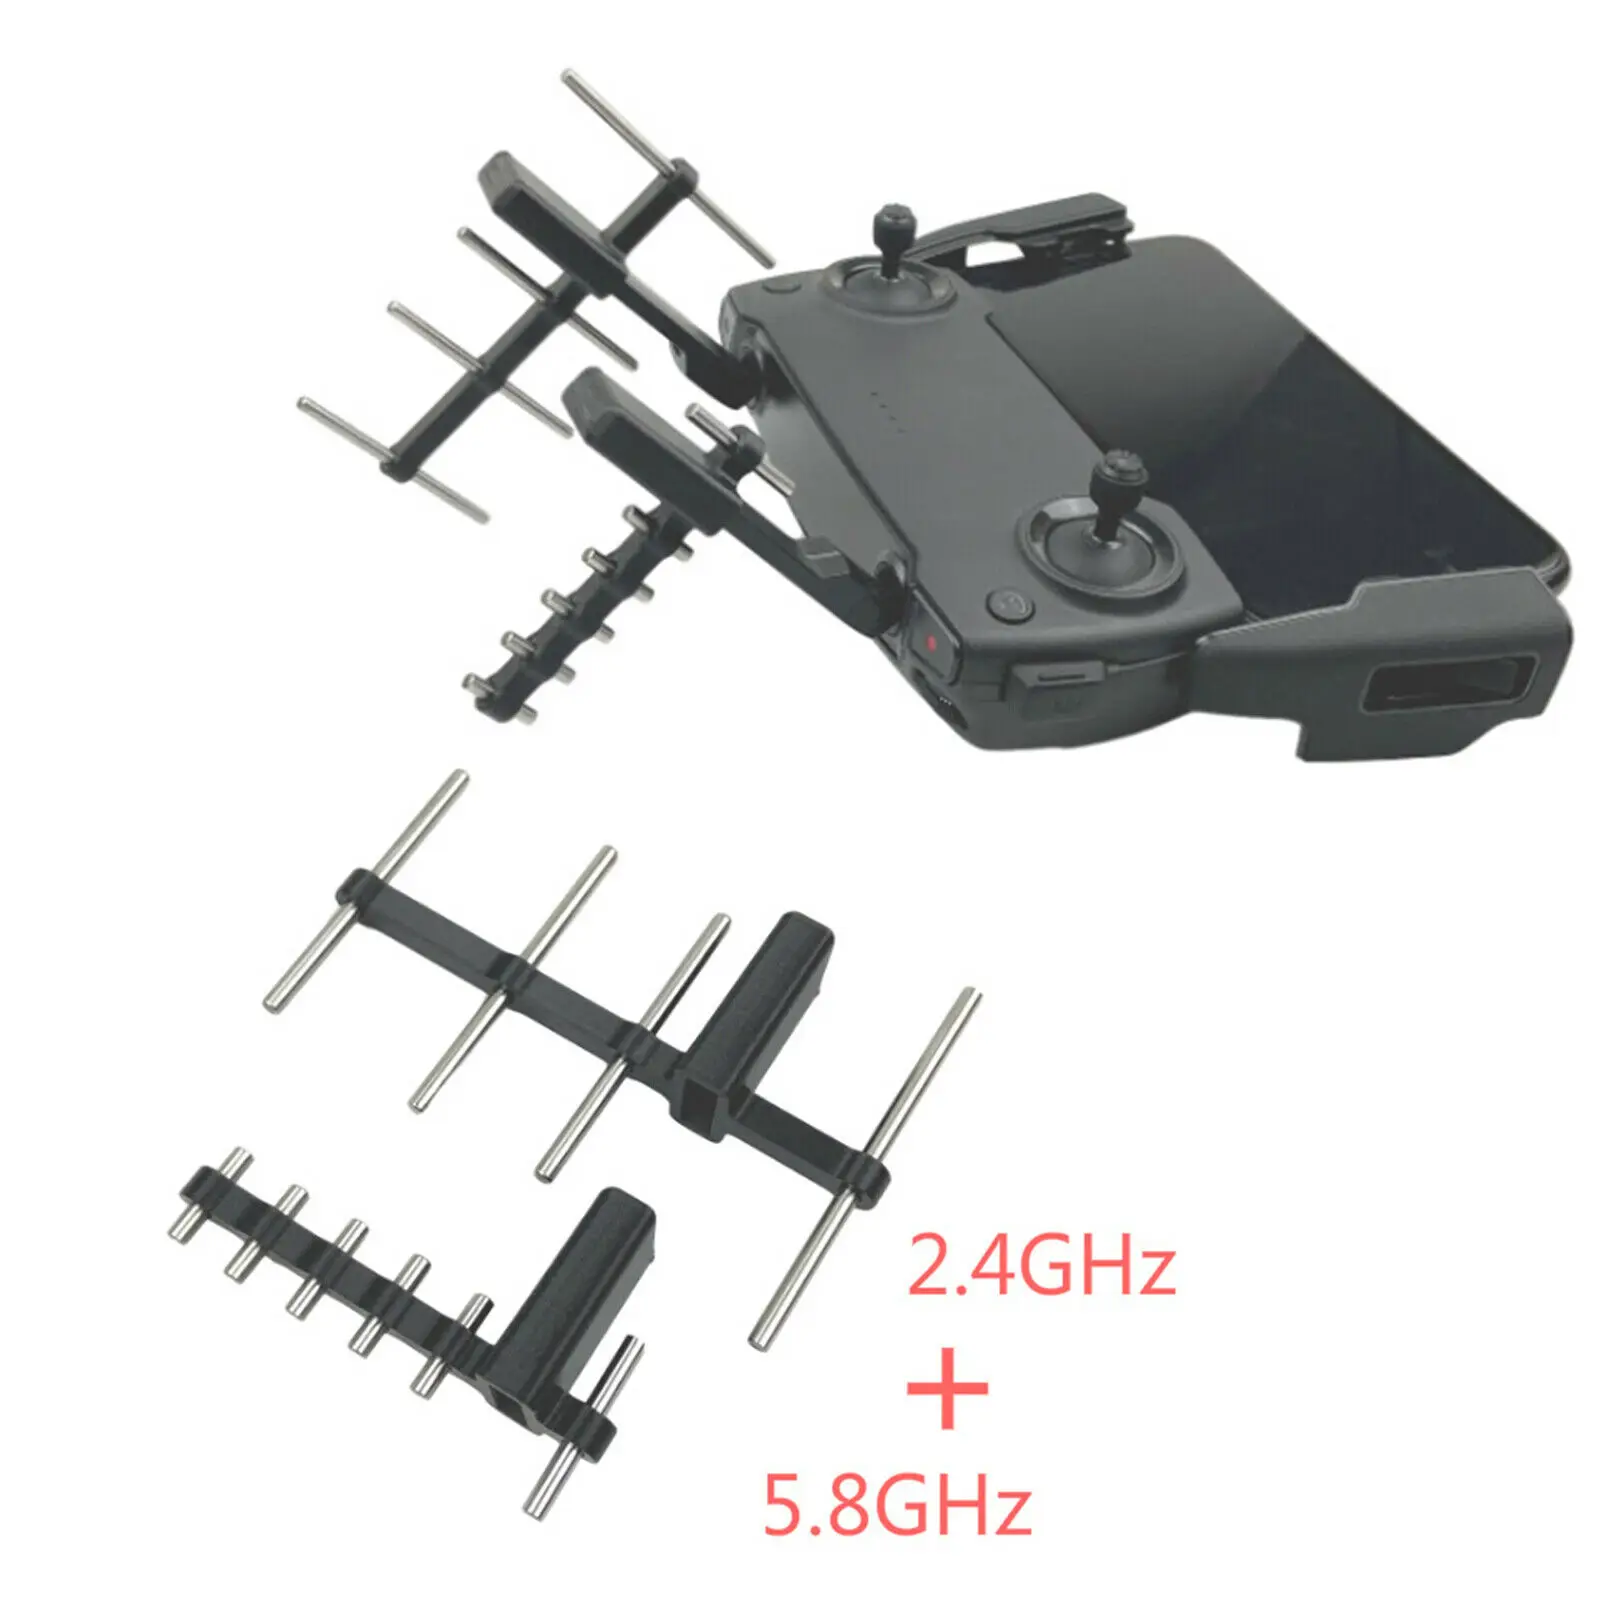 

2.4G/5.8G/2.4G+5.8G Optional Signal Antenna Range Extender Replacement Parts For DJI Mavic Mini Air Pro 2 Zoom Spark Drone